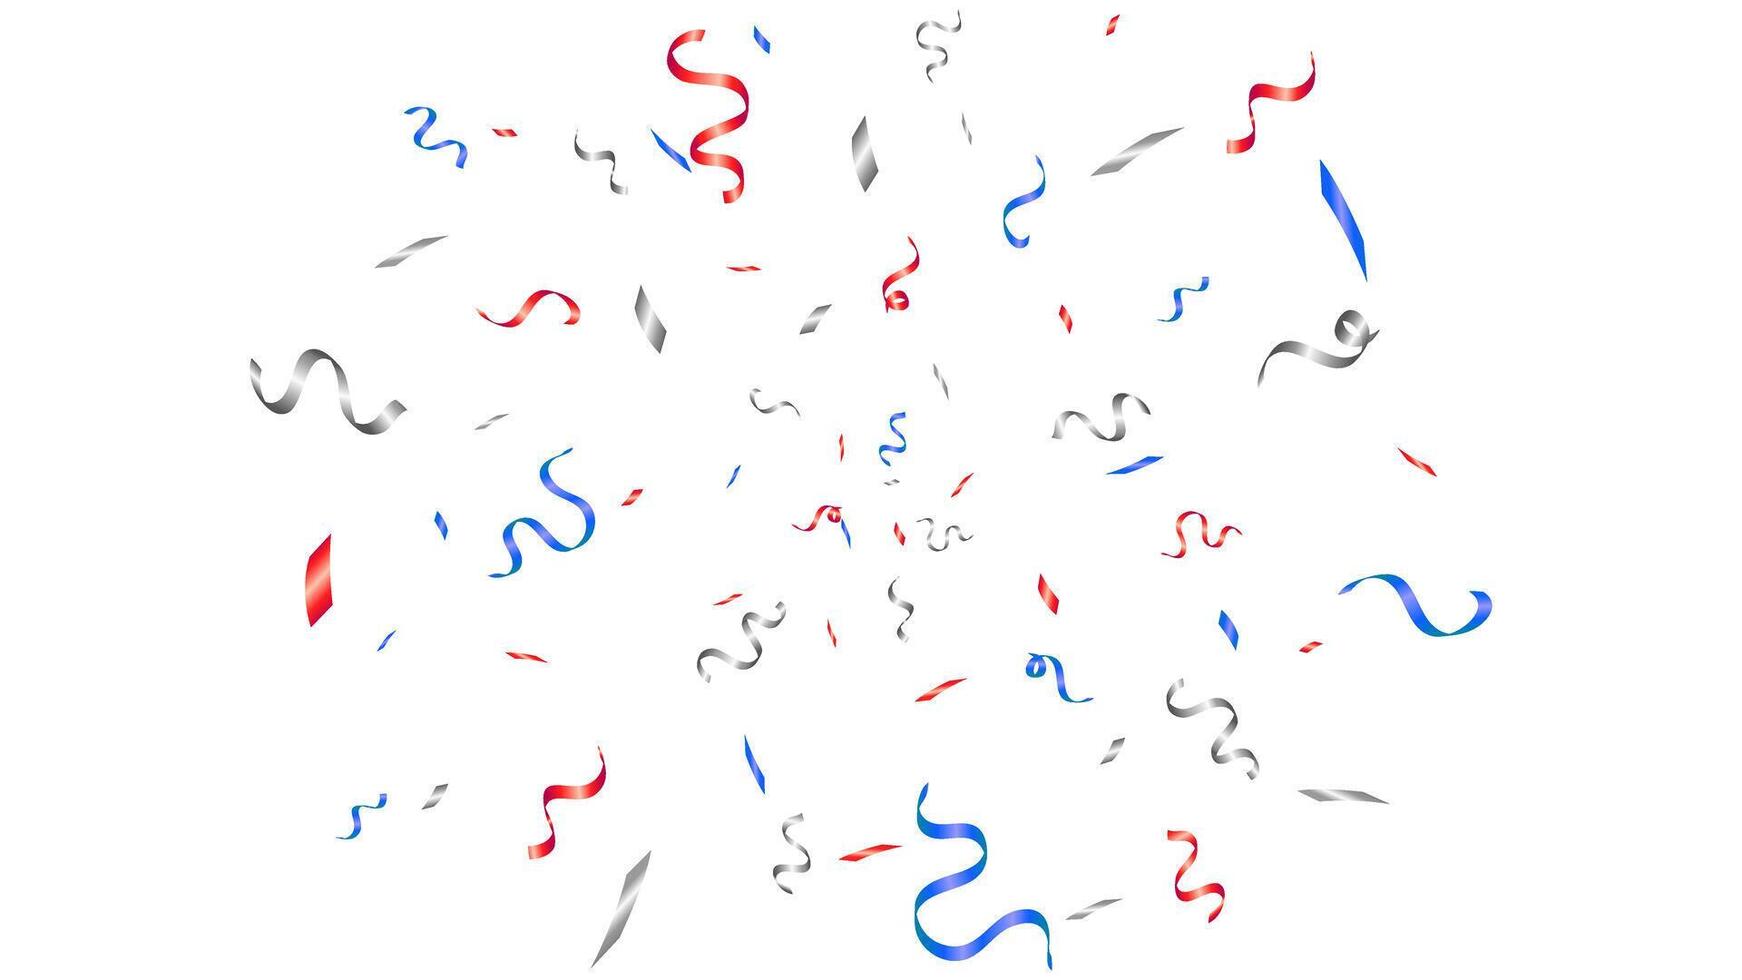 Party holiday blue, red and white color confetti and tinsel serpentine isolated elements design vector